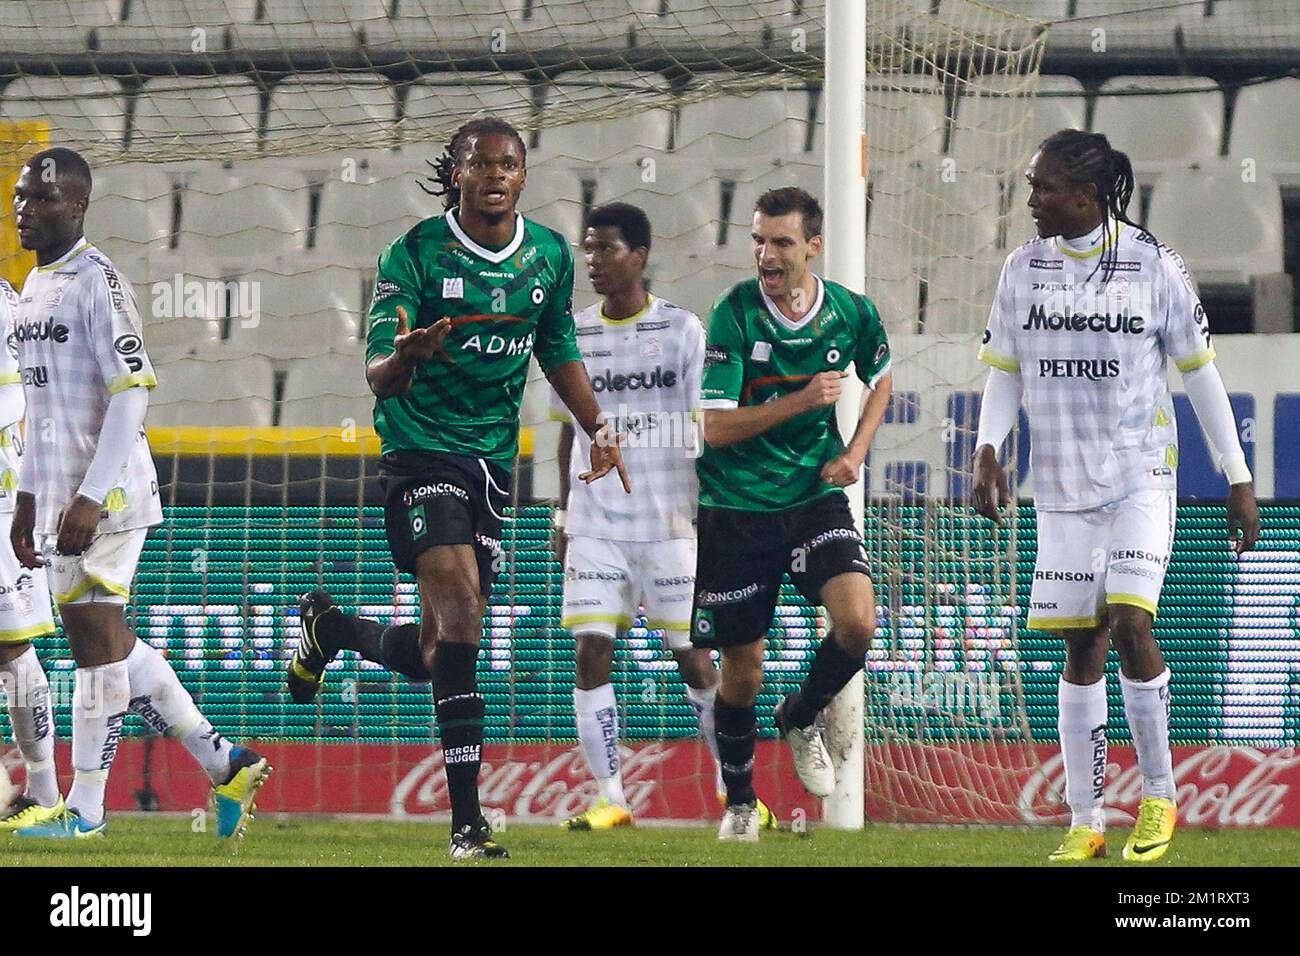 20131019 - BRUGGE, BELGIUM: Cercle's Michael Uchebo celebrates after scoring during the Jupiler Pro League match between Cercle Brugge and Zulte Waregem, in Brugge, Saturday 19 October 2013, on day 11 of the Belgian soccer championship. BELGA PHOTO BRUNO FAHY Stock Photo